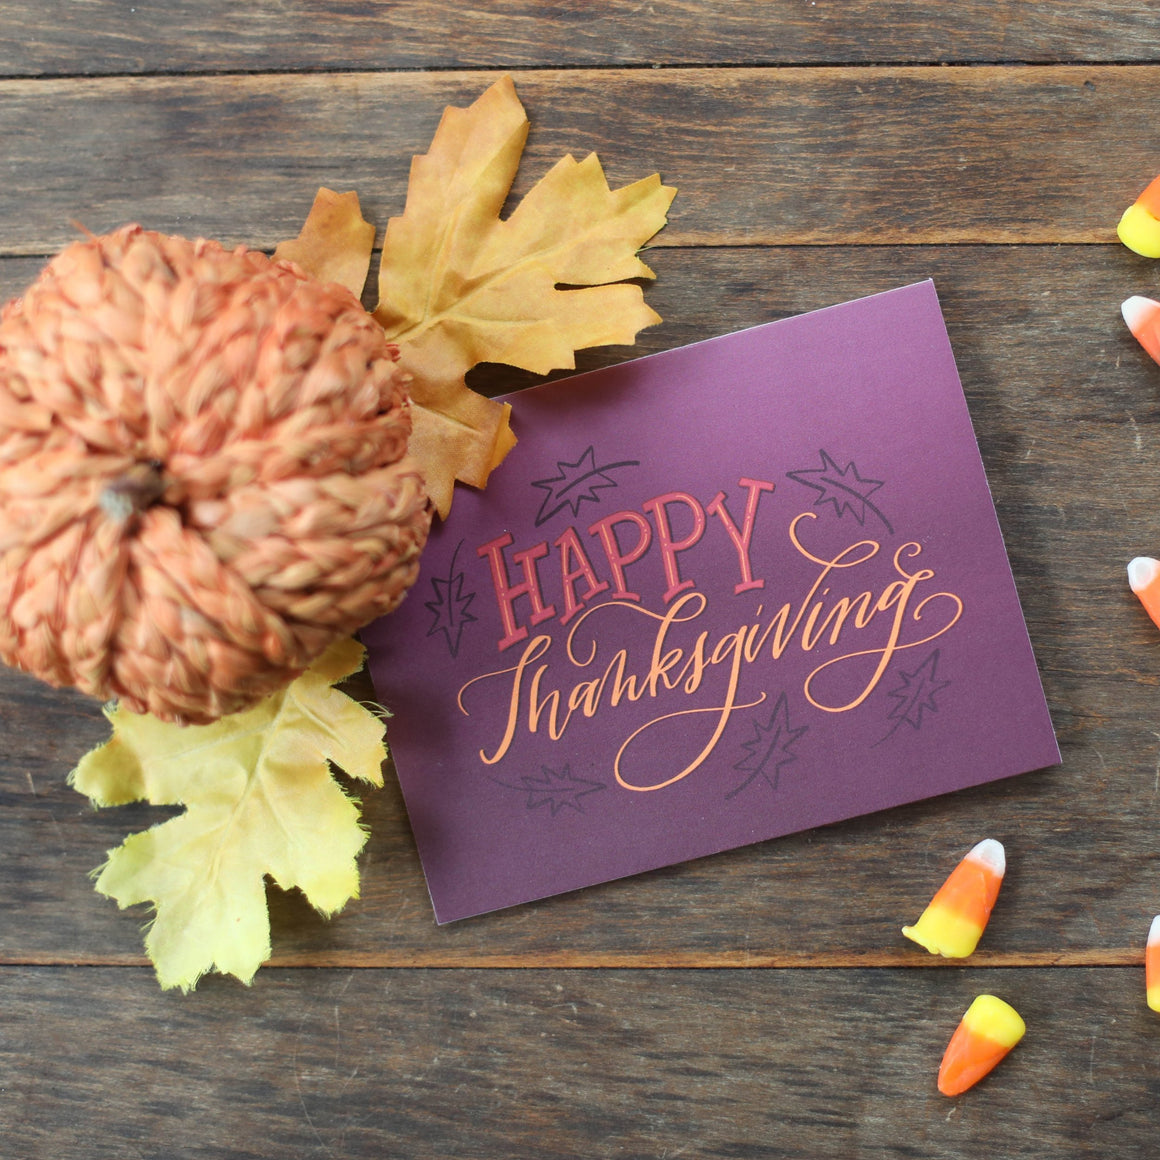 "Happy Thanksgiving" card